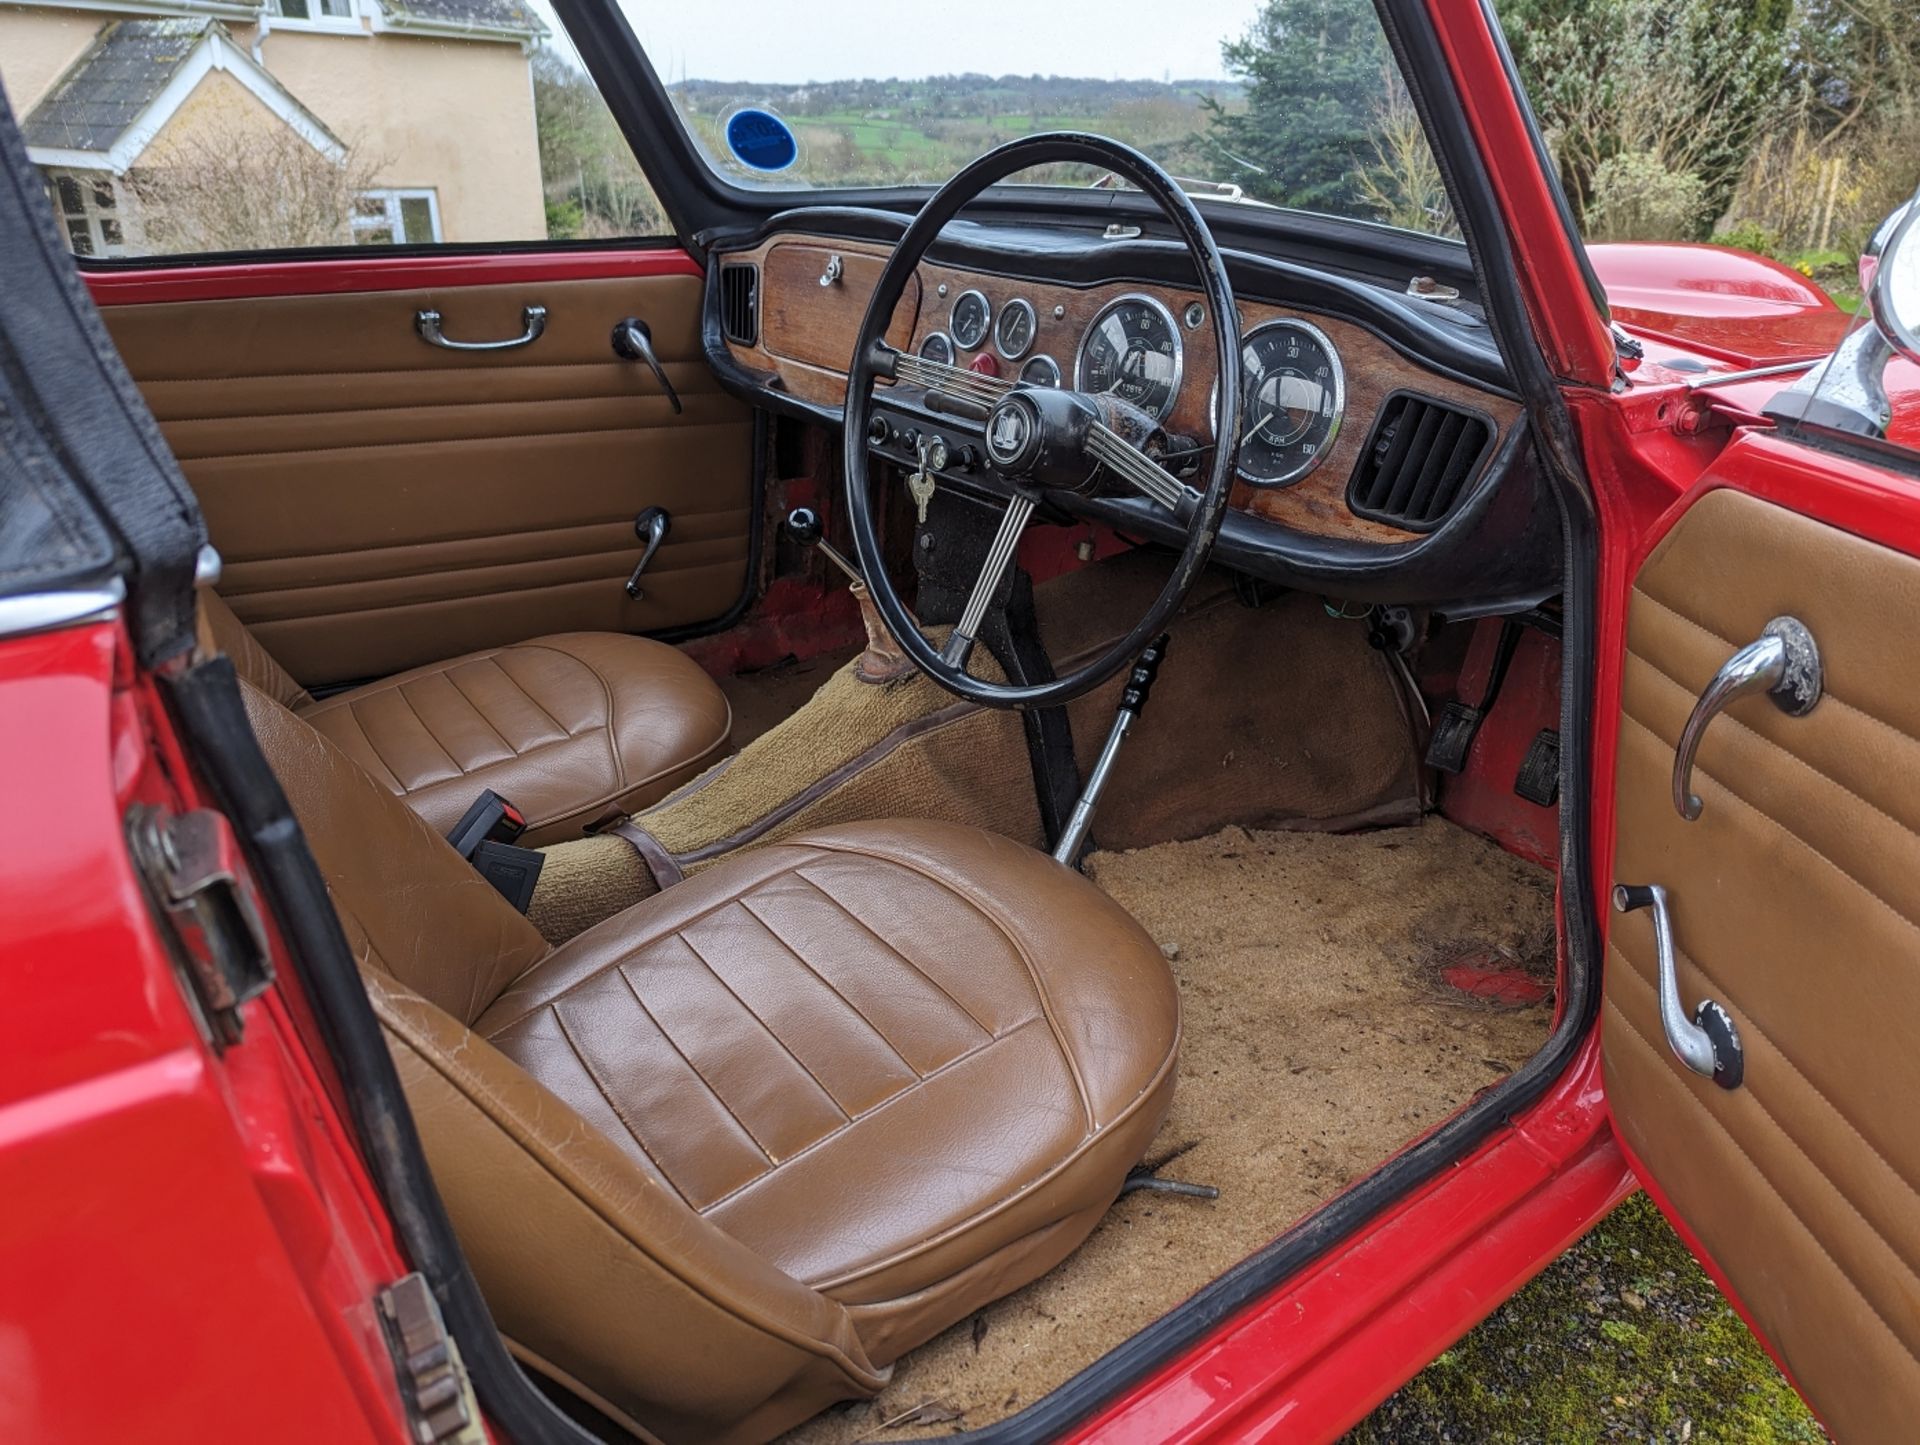 1962 Triumph TR4 Registration number GAS 310 Red with a tan interior Imported from South Africa - Image 8 of 8